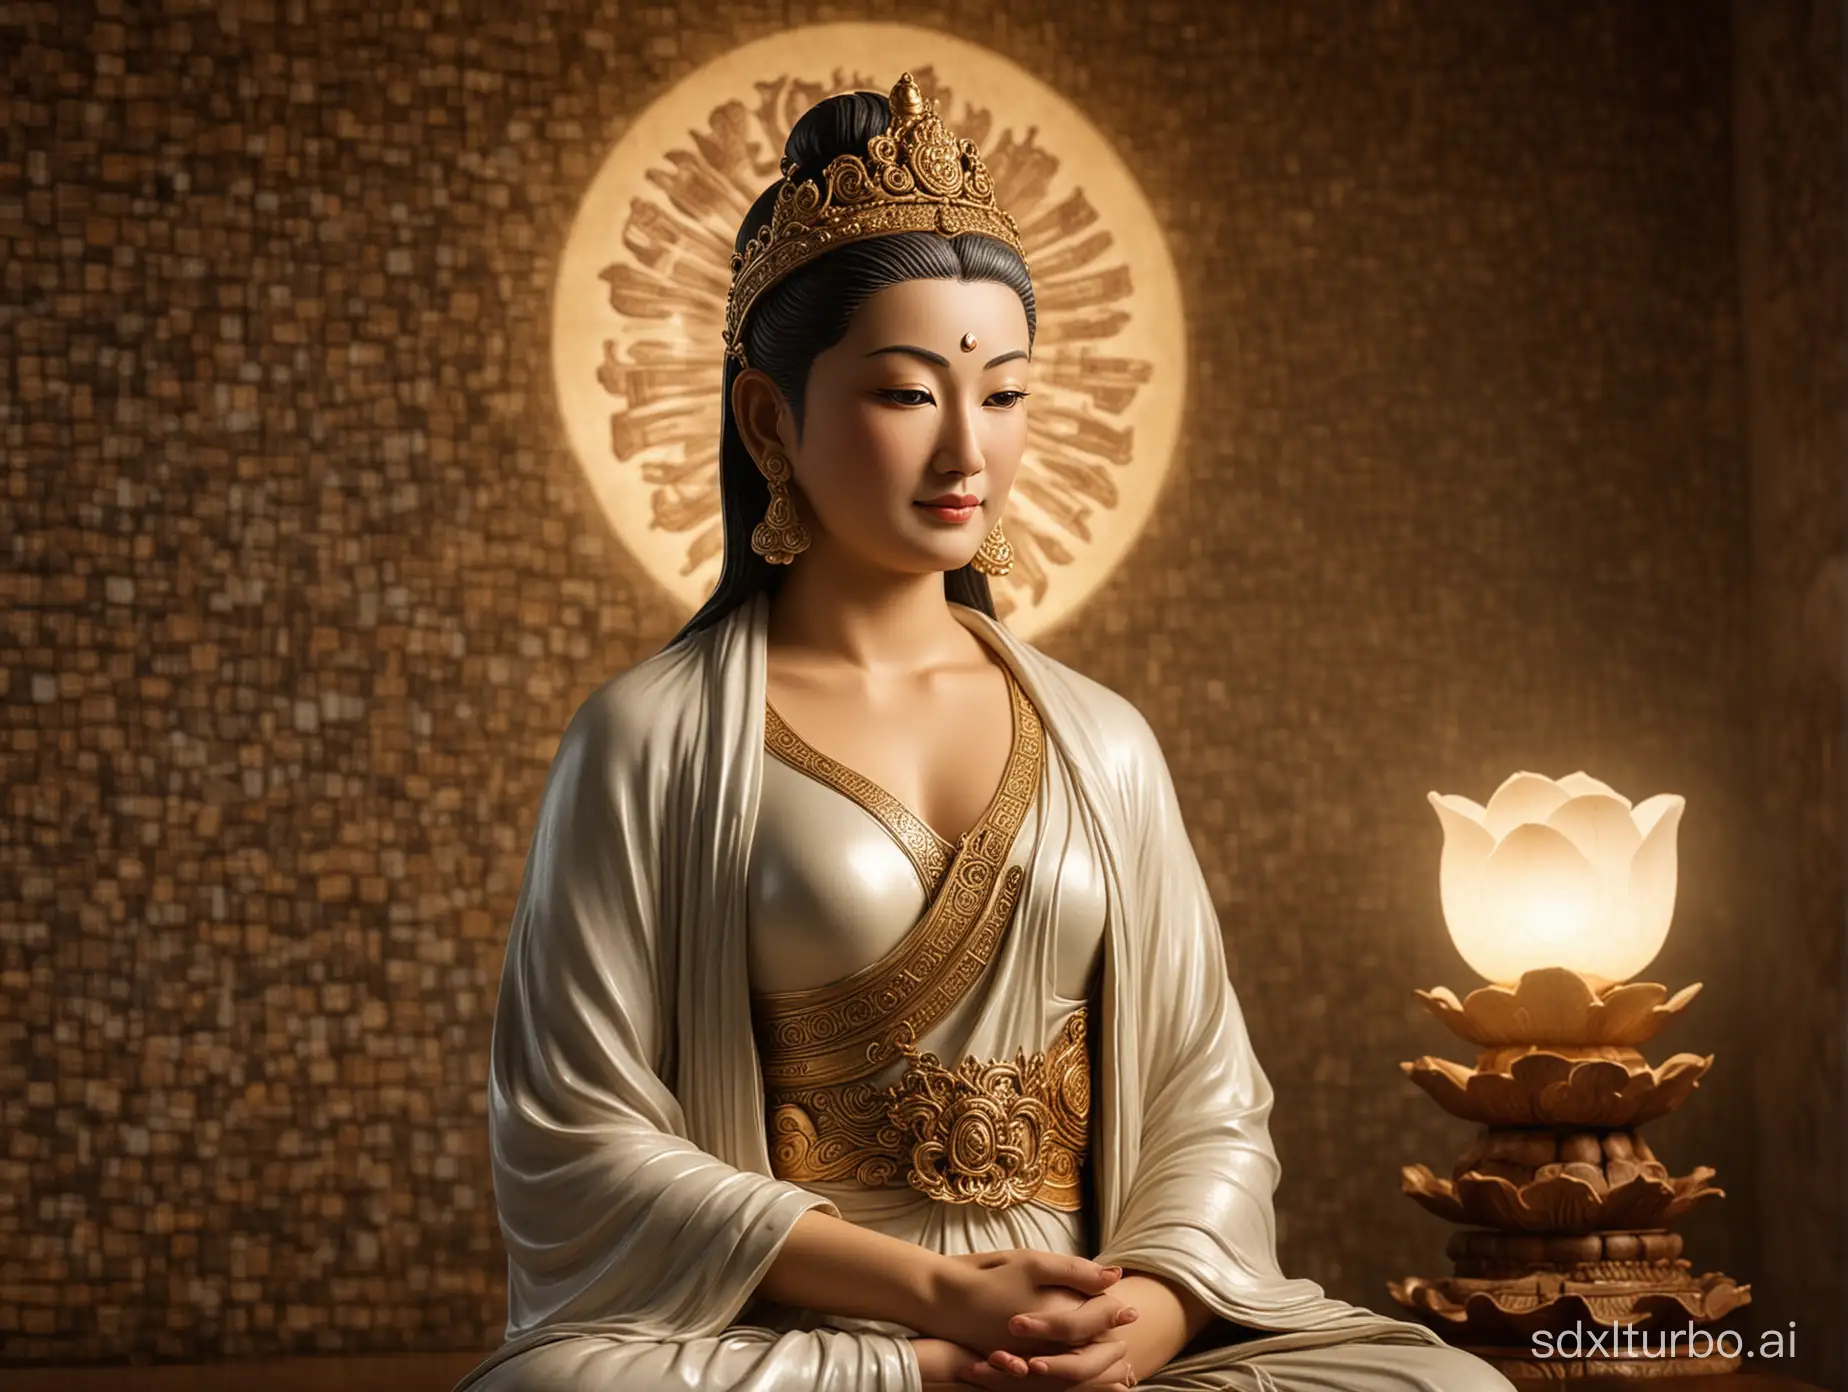 The real version of Guanyin Bodhisattva as a beautiful woman, with Buddha light behind her,